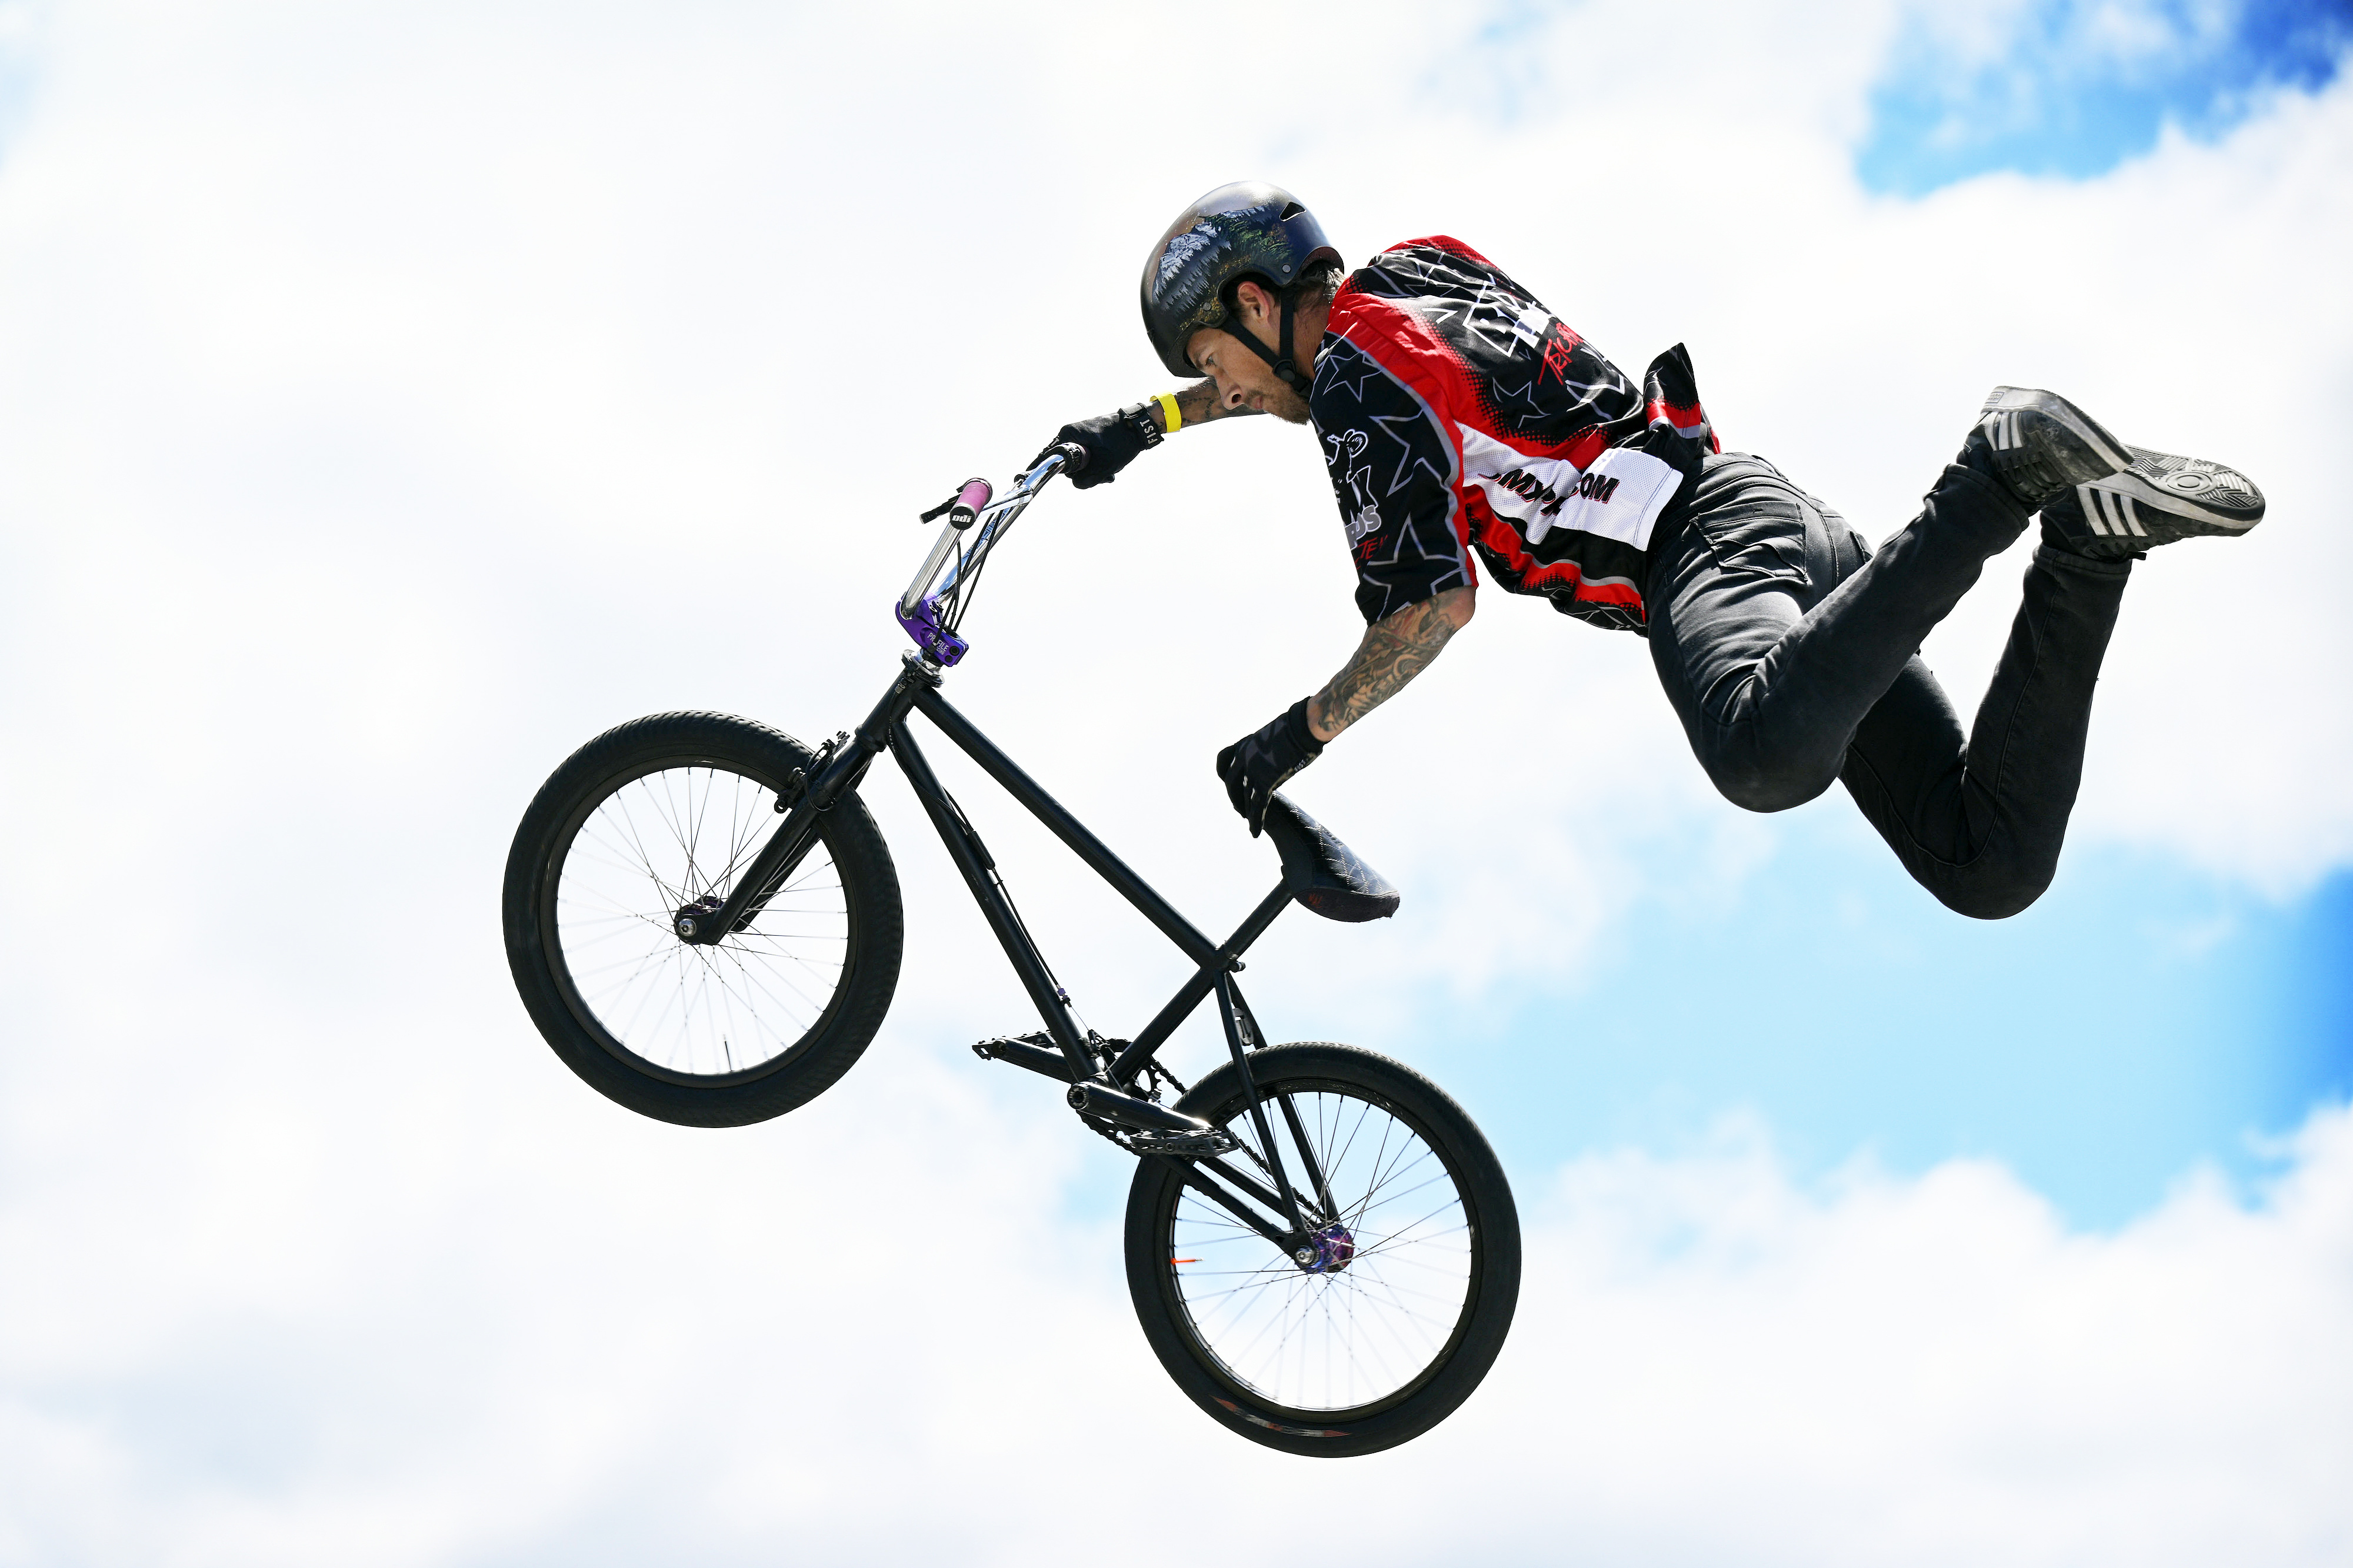 A local pro-BMX rider is preforms a jump at 38th...